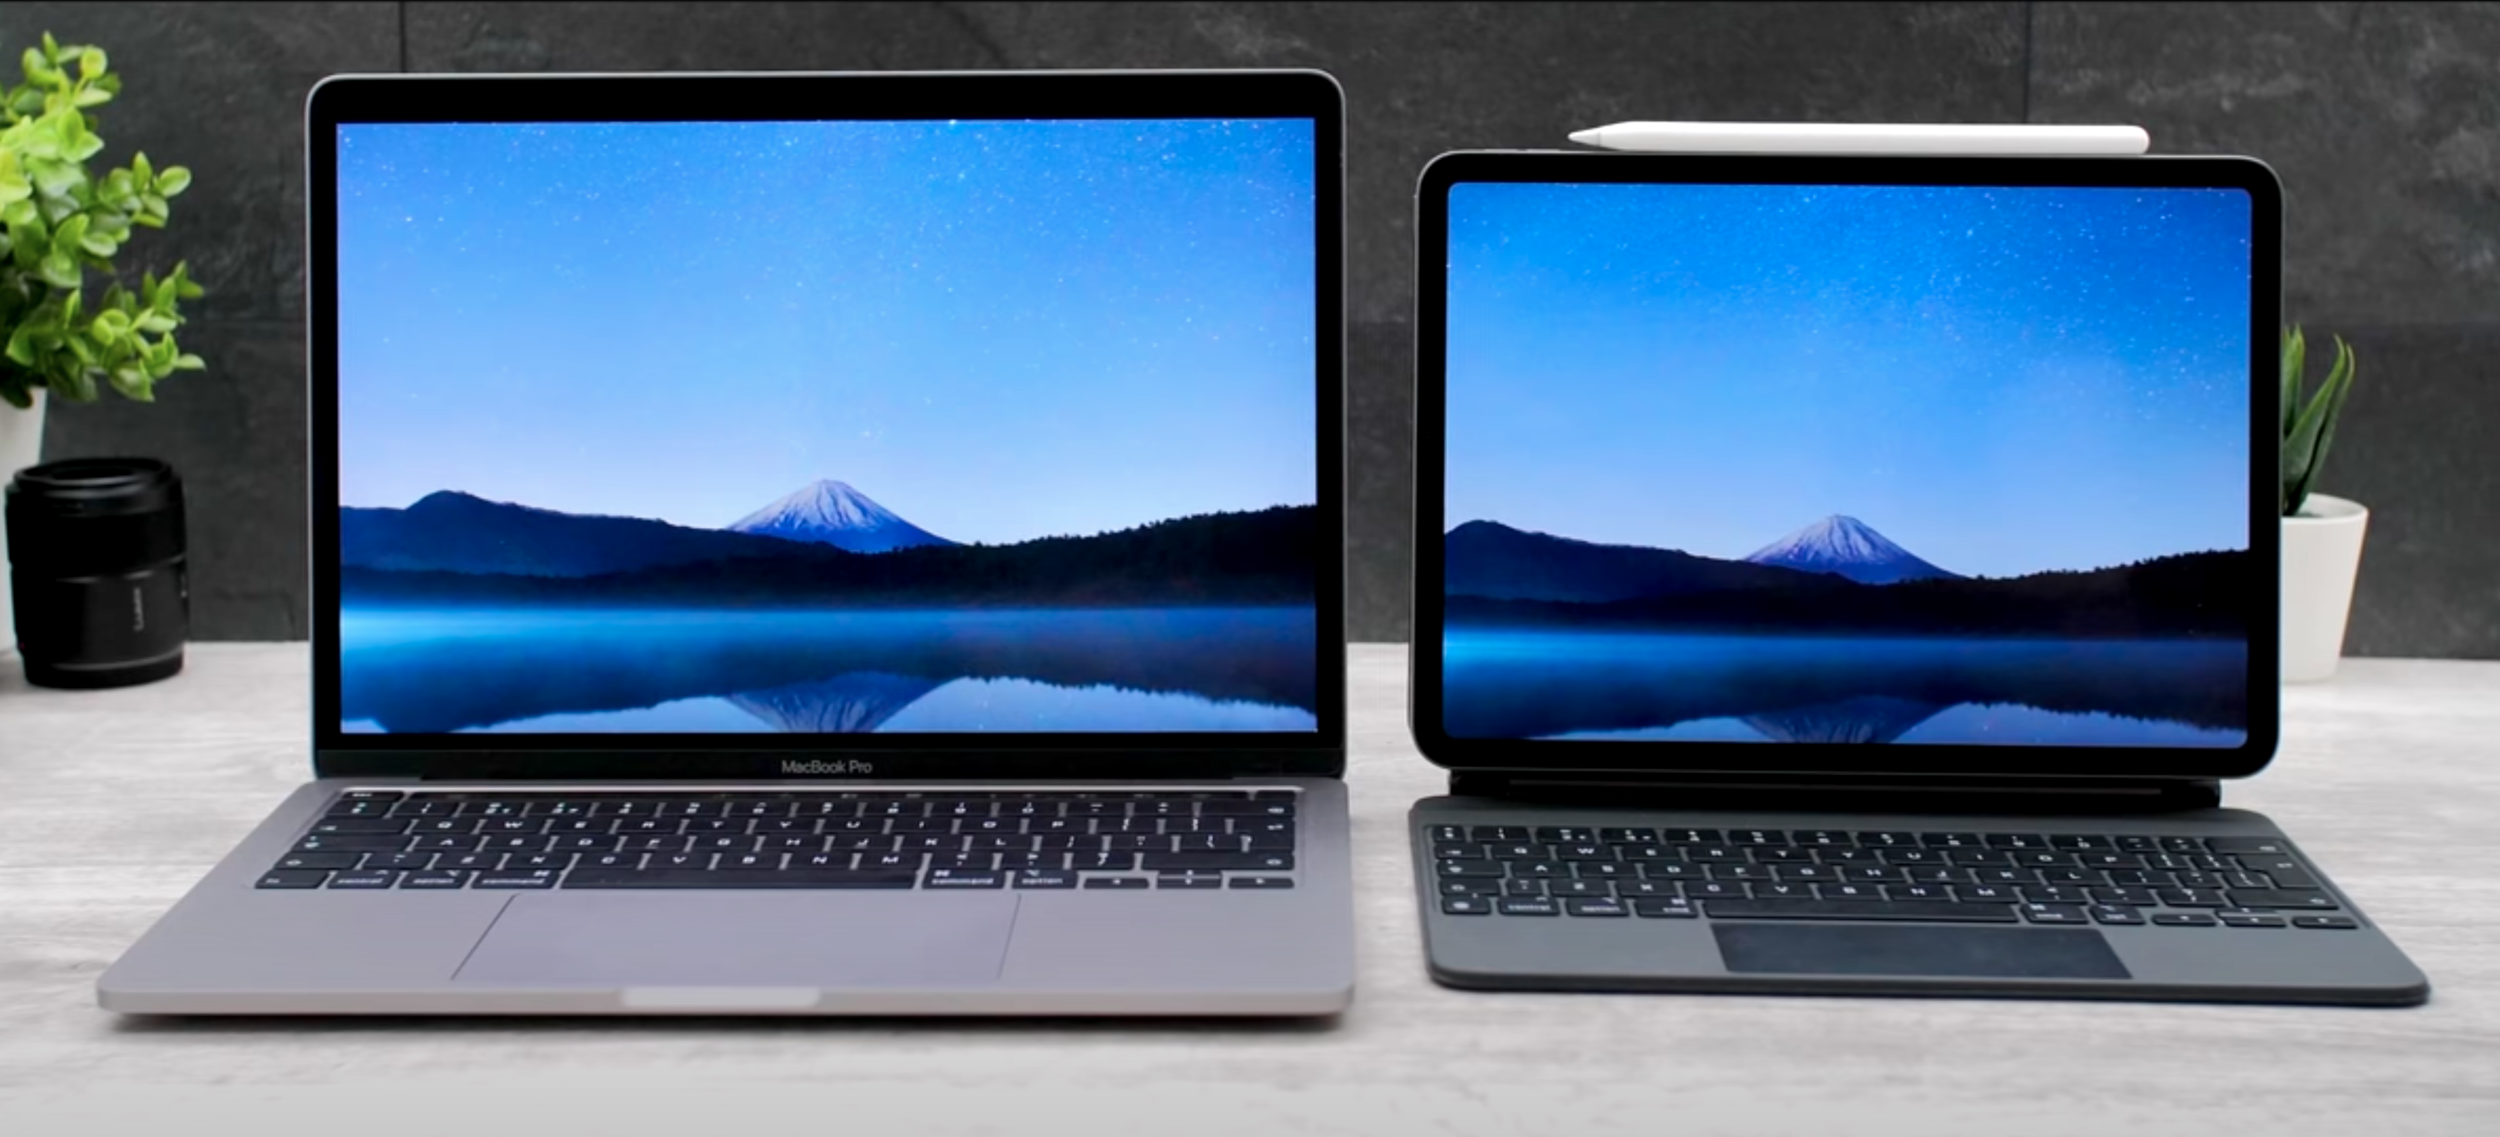 iPad Pro vs MacBook Pro 13 (2020) - Which One's the Real Laptop? —  ZONEofTECH